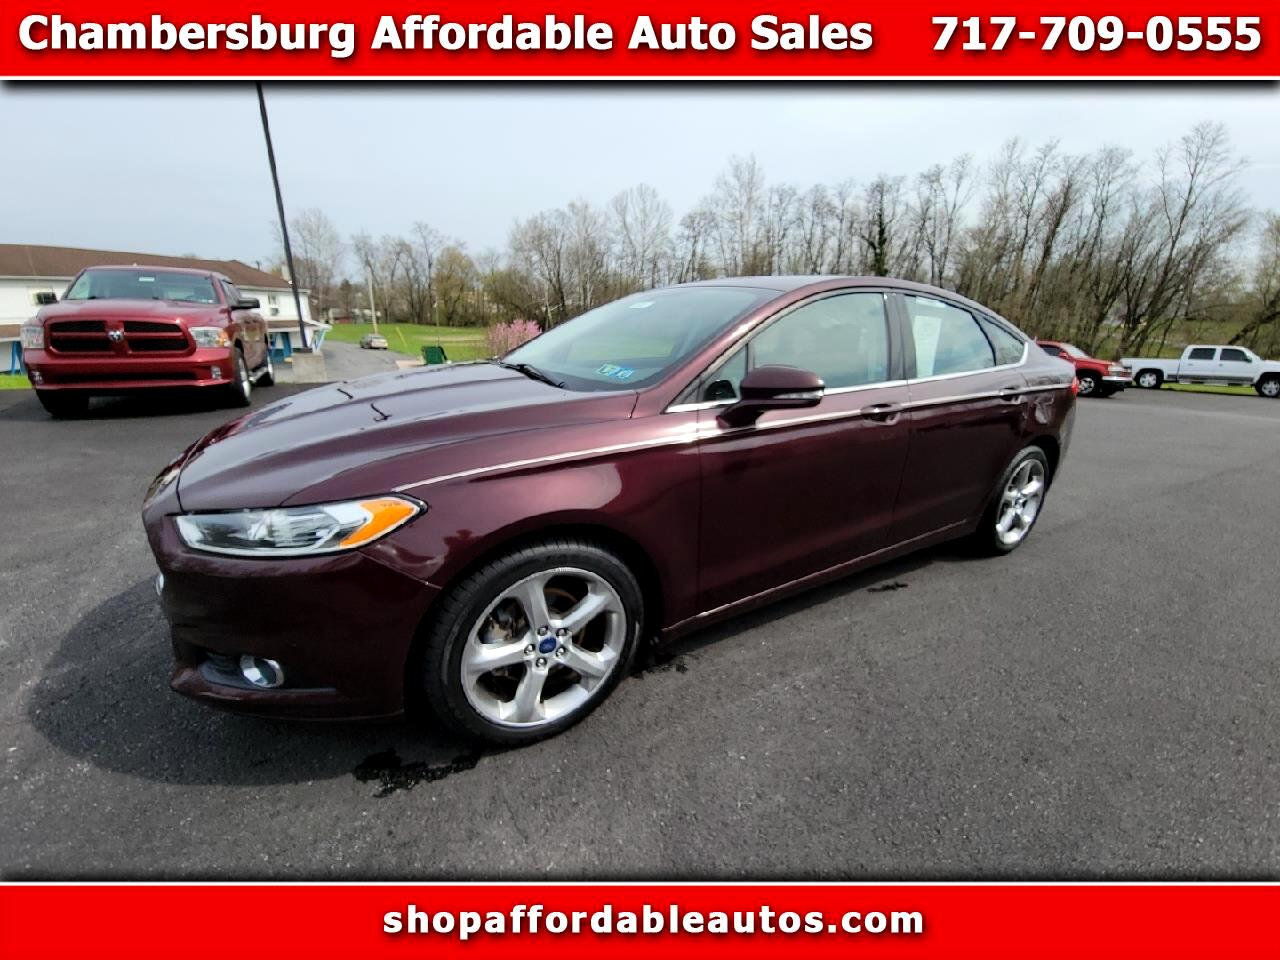 Used Ford Fusion Chambersburg Pa